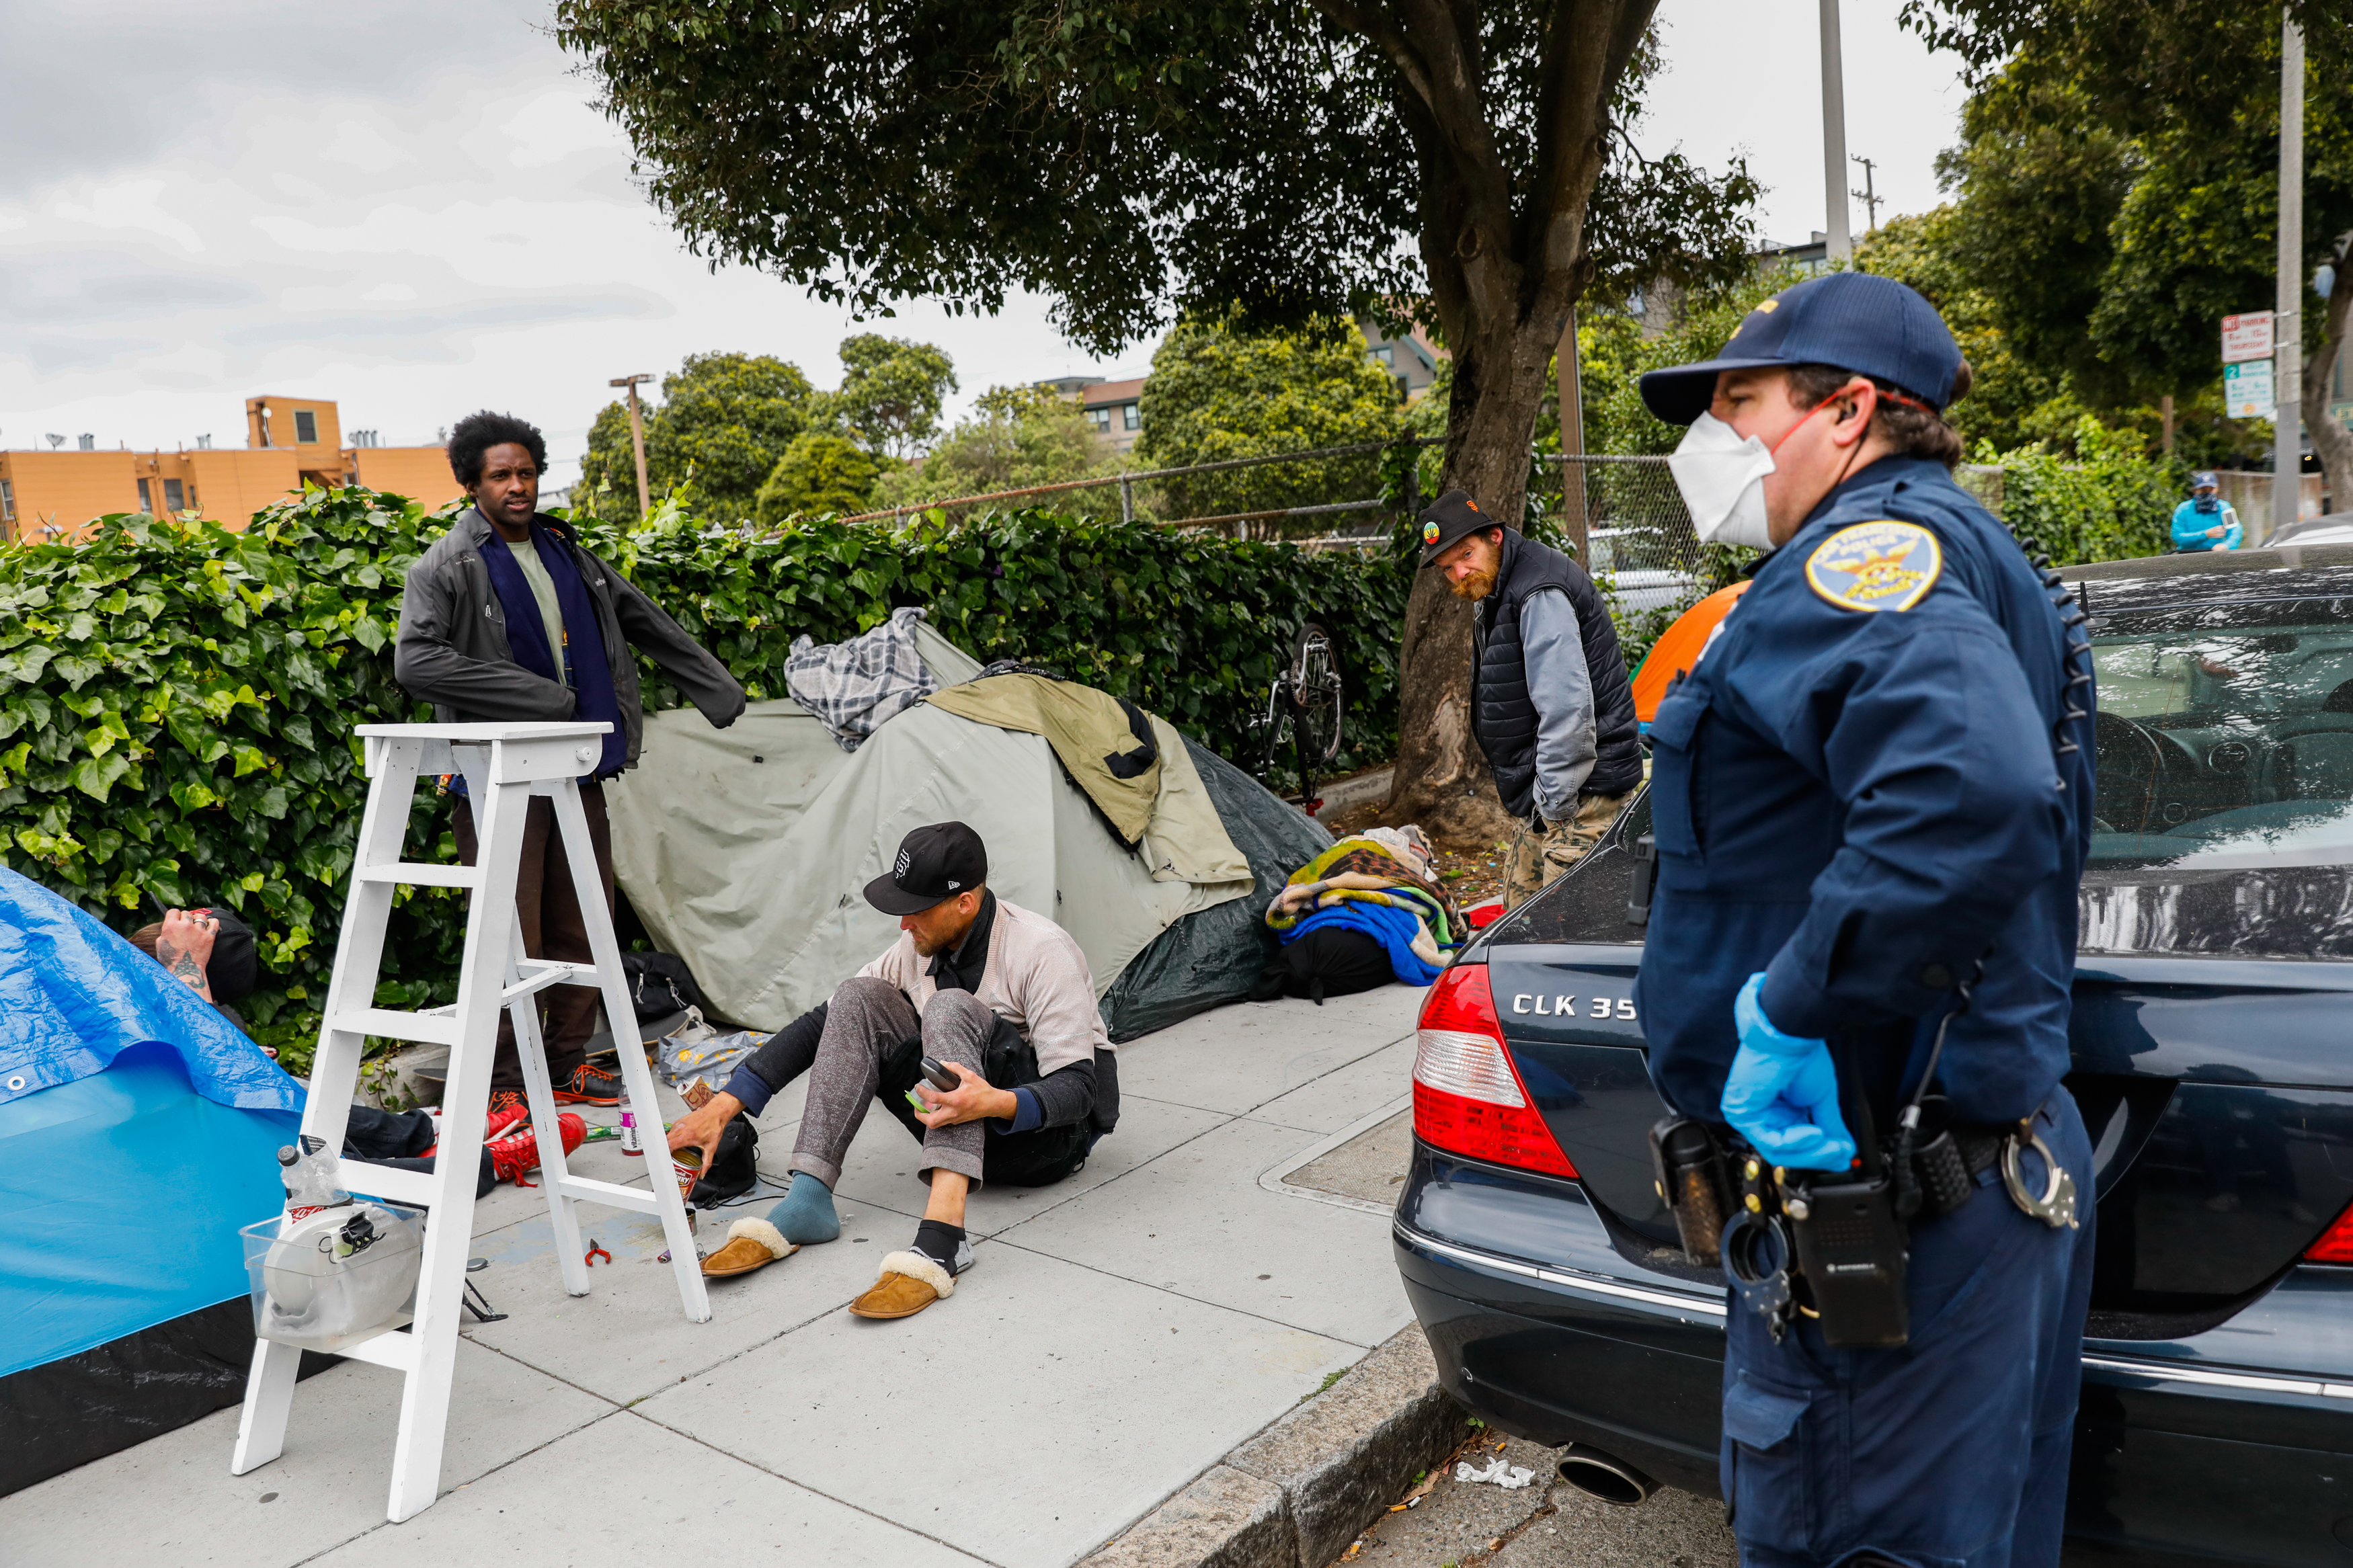 A police officer asks a group of homeless men to social distance themselves.